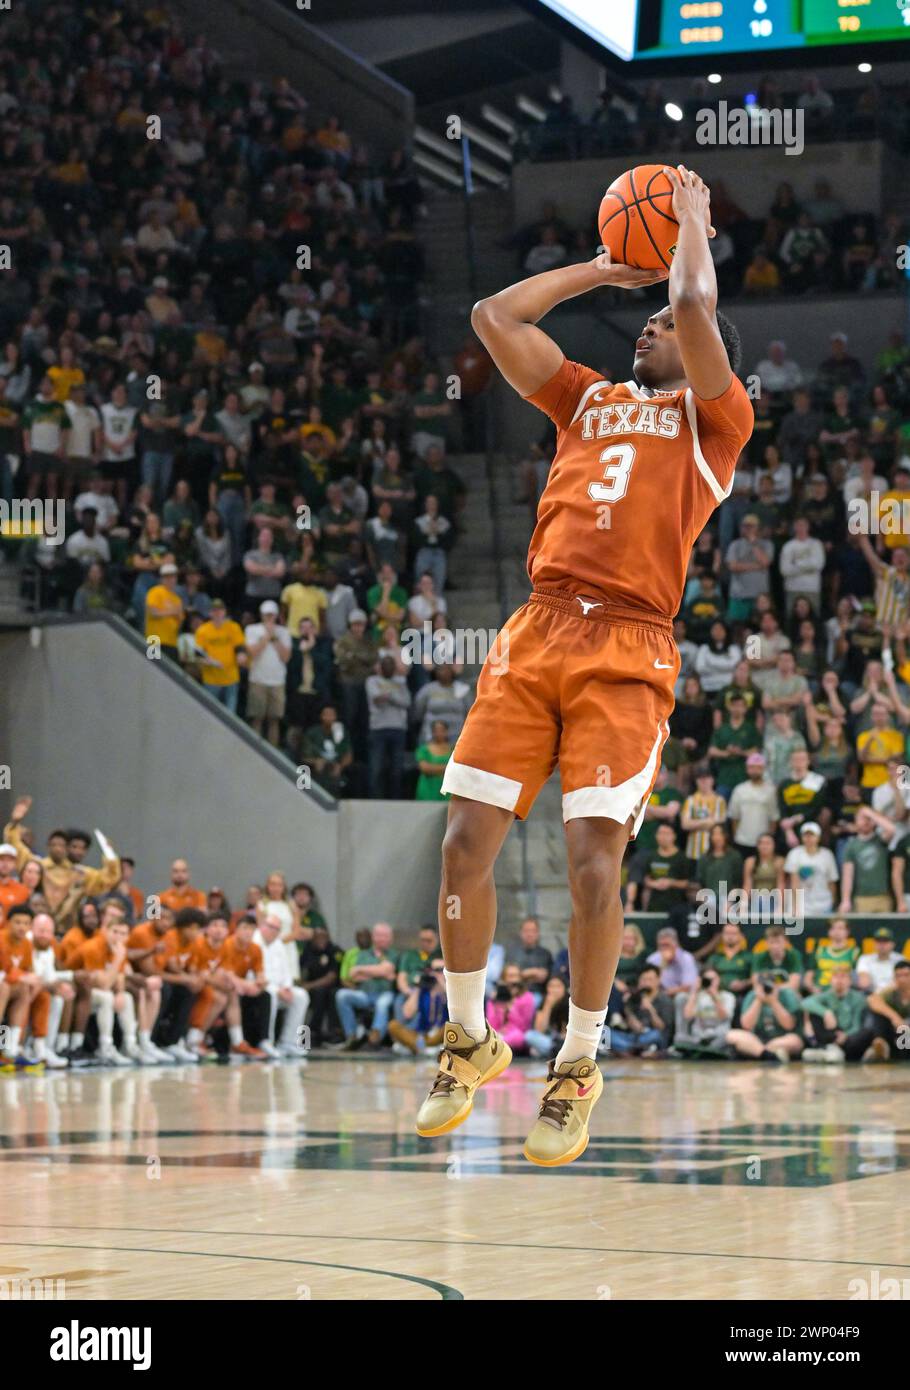 Waco, Texas, USA. 4th Mar, 2024. Texas Longhorns guard Max Abmas (3) shoots the ball during the 1st half of the NCAA Basketball game between Texas Longhorns and Baylor Bears at Foster Pavilion in Waco, Texas. Matthew Lynch/CSM/Alamy Live News Stock Photo